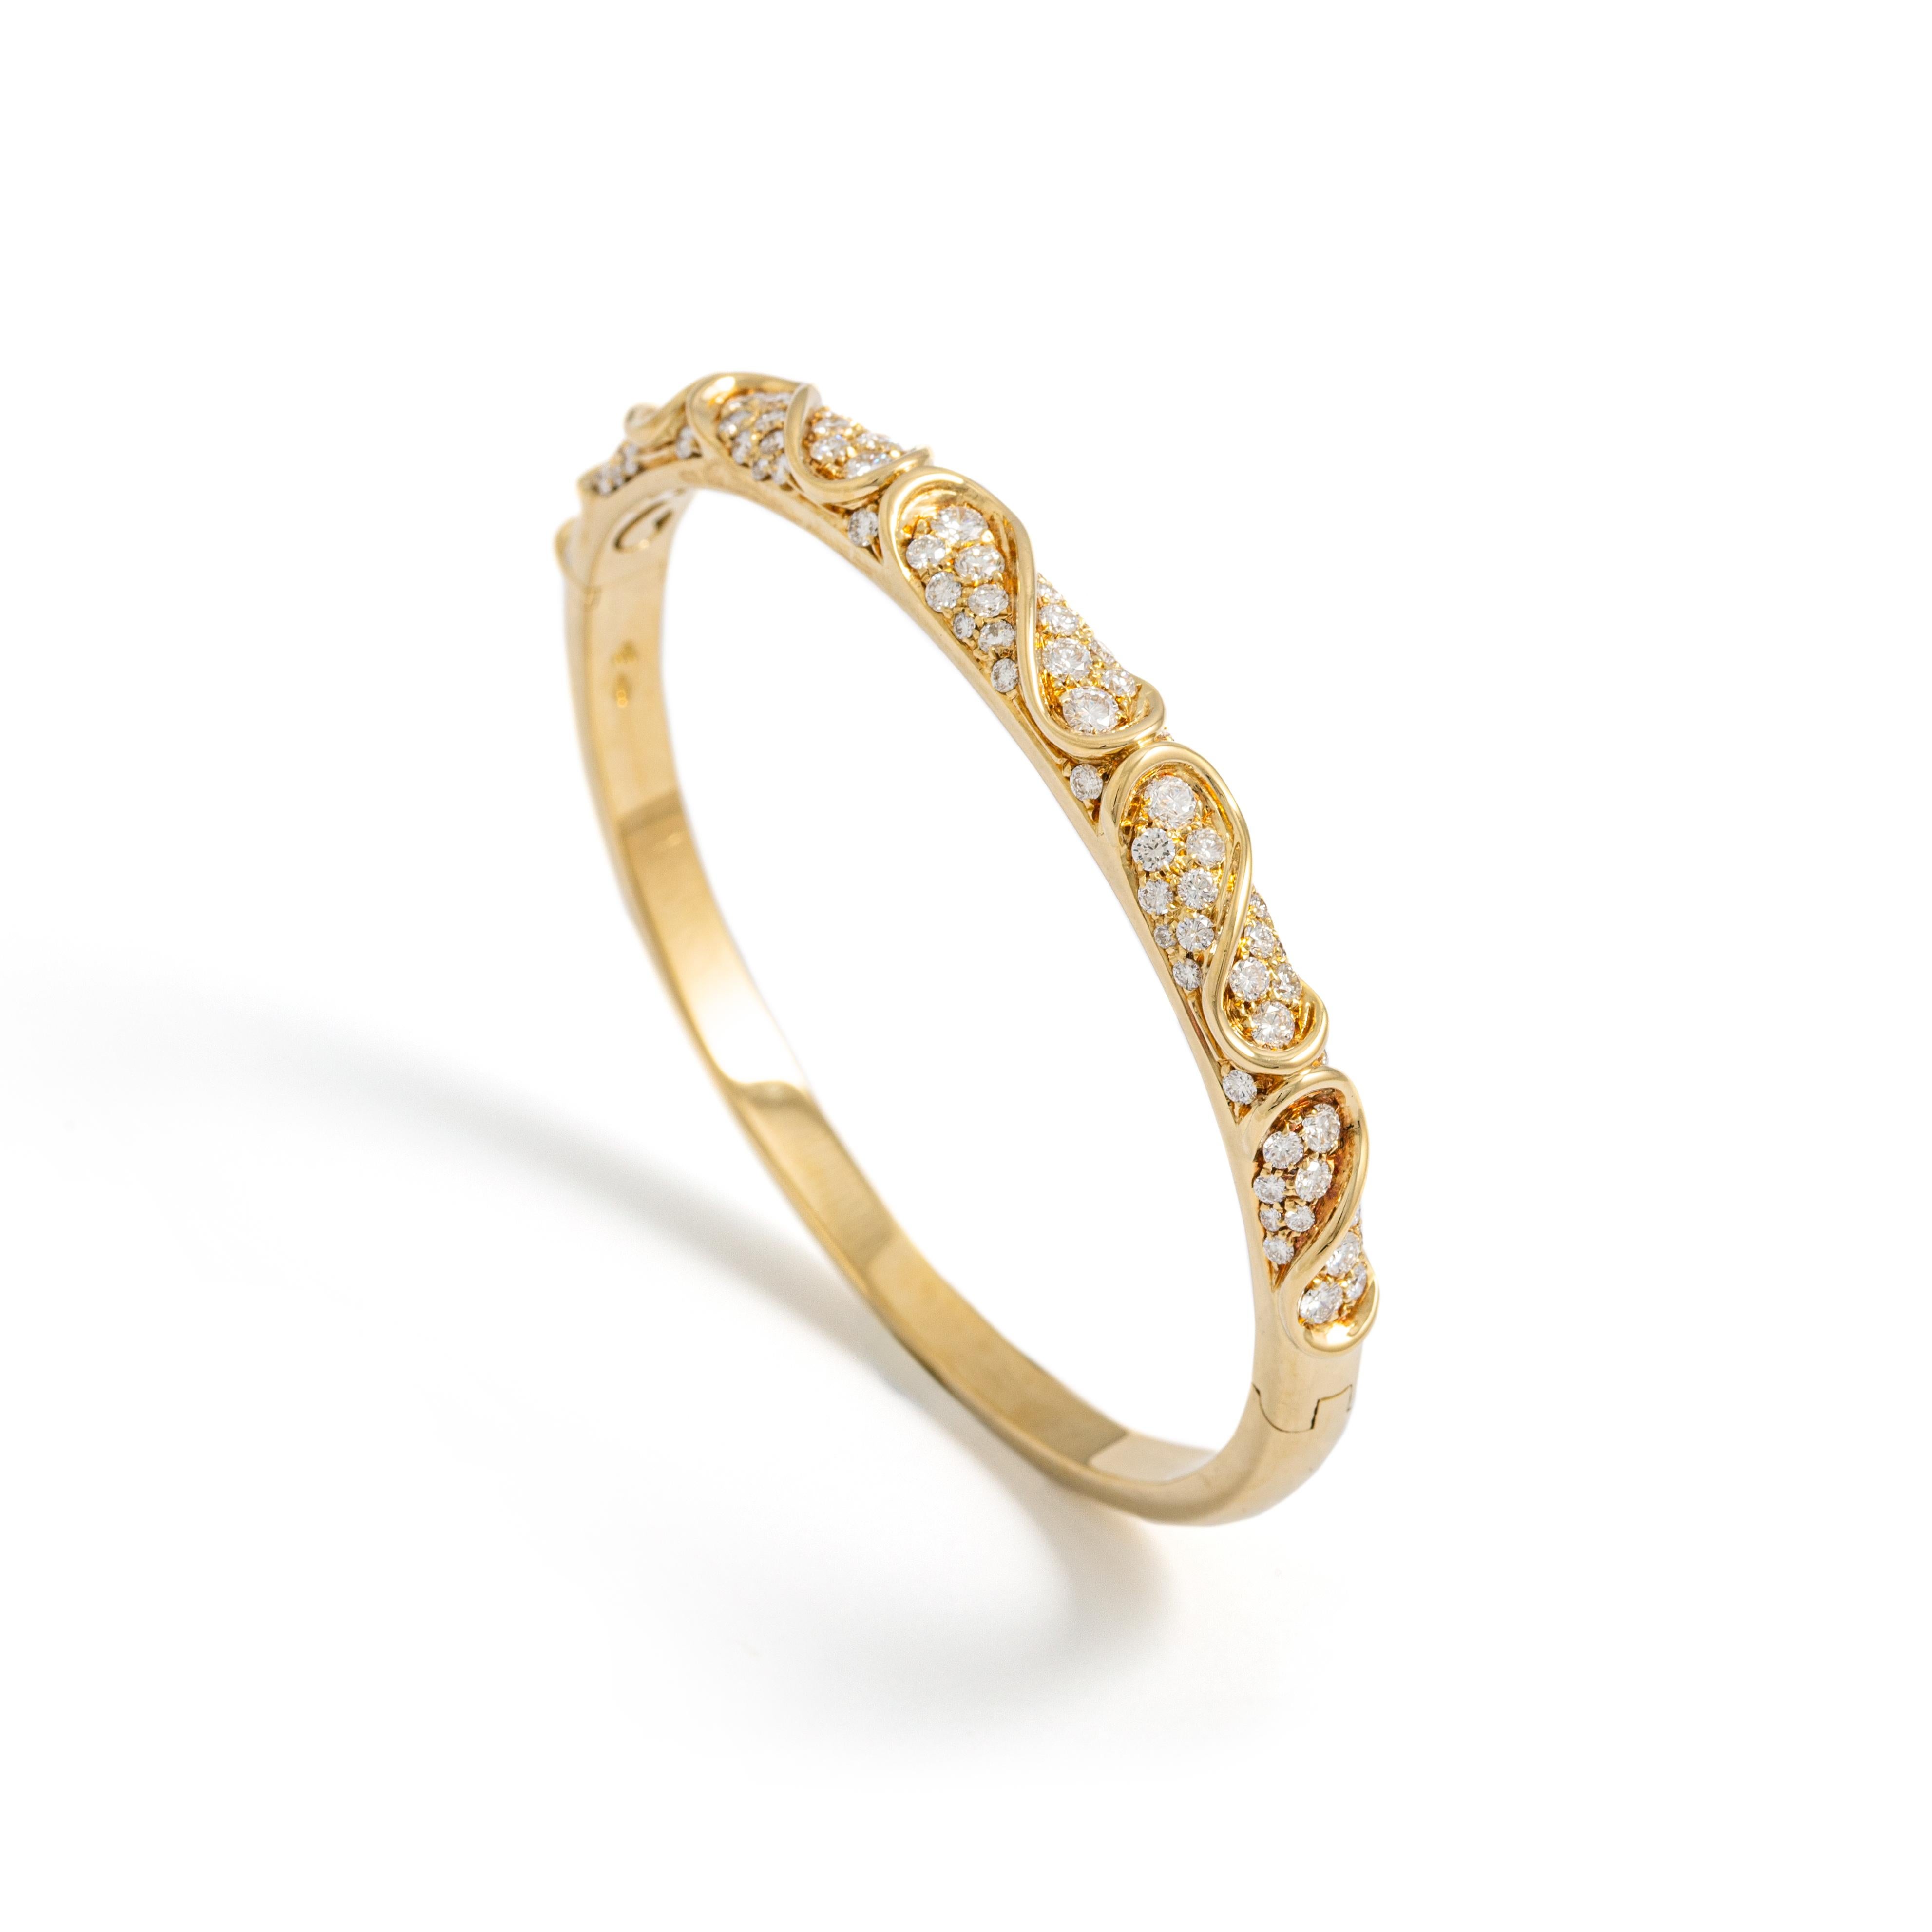 Yellow gold bracelet set with diamonds 2.19cts.
Inner circumference: Approximately 16.33 centimeters ( 6.43 inches)

Total weight: 25.48 grams.
Width on the top: 0.6 centimeters ( 0.24 inches).

